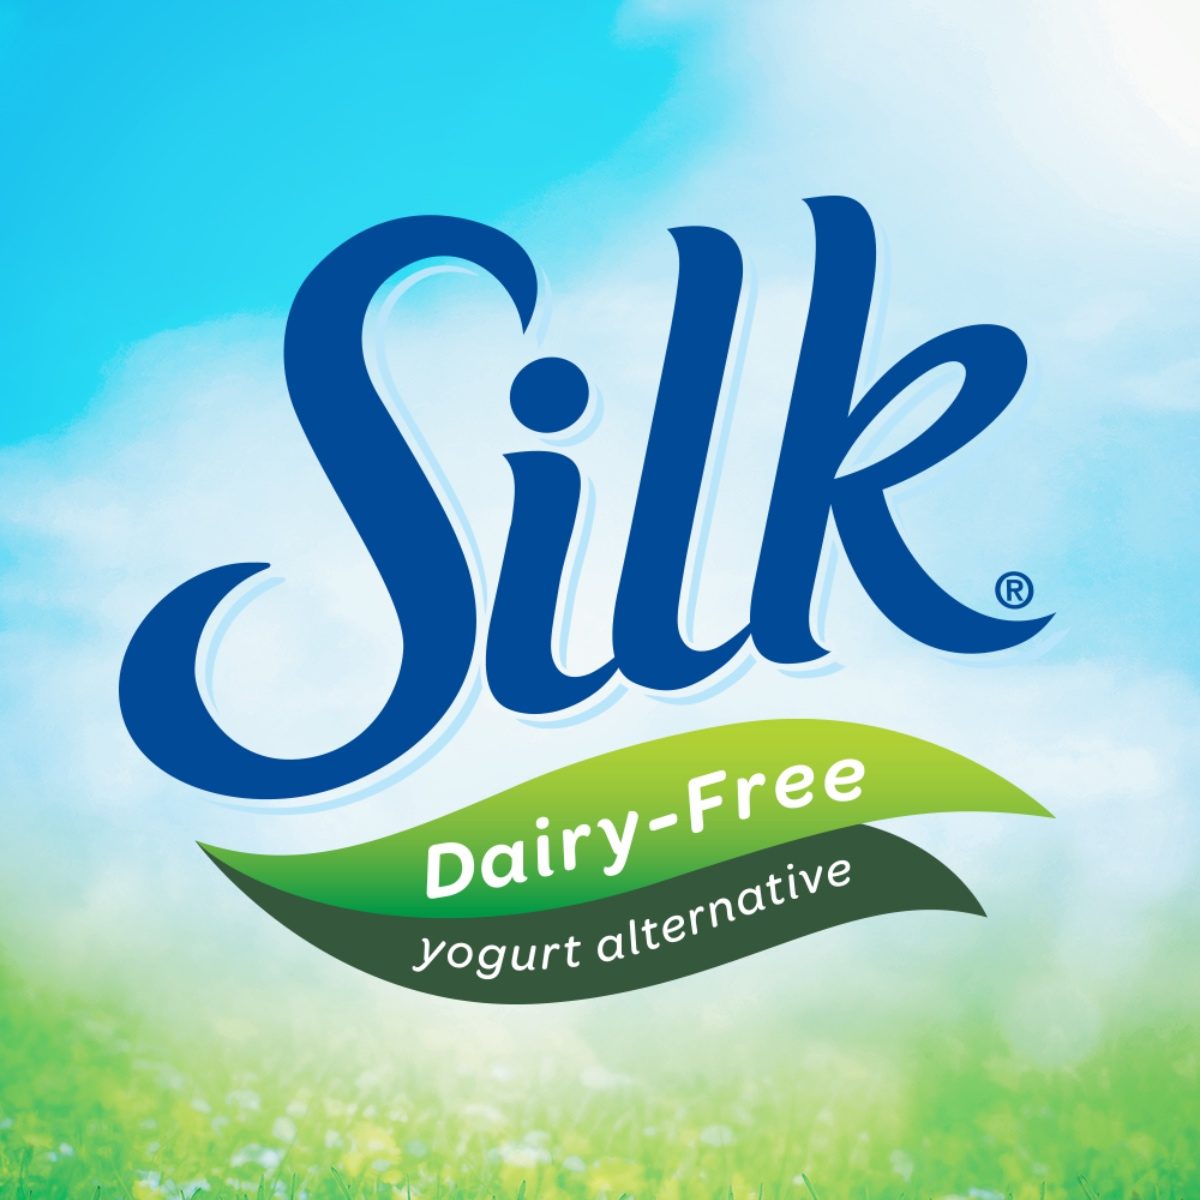 <p><strong><a class="SWhtmlLink" href="https://silk.com" rel="noopener">Silk</a>, Broomfield</strong></p> <p>This famous dairy-free milk producer started as a tofu company and experimented with lots of plant-based foods—like meatballs sandwiches and sausage—before settling on soy milk. Today, Silk makes all kinds of non-dairy milk, including almond, coconut and cashew, along with non-dairy creamers and yogurt.</p>